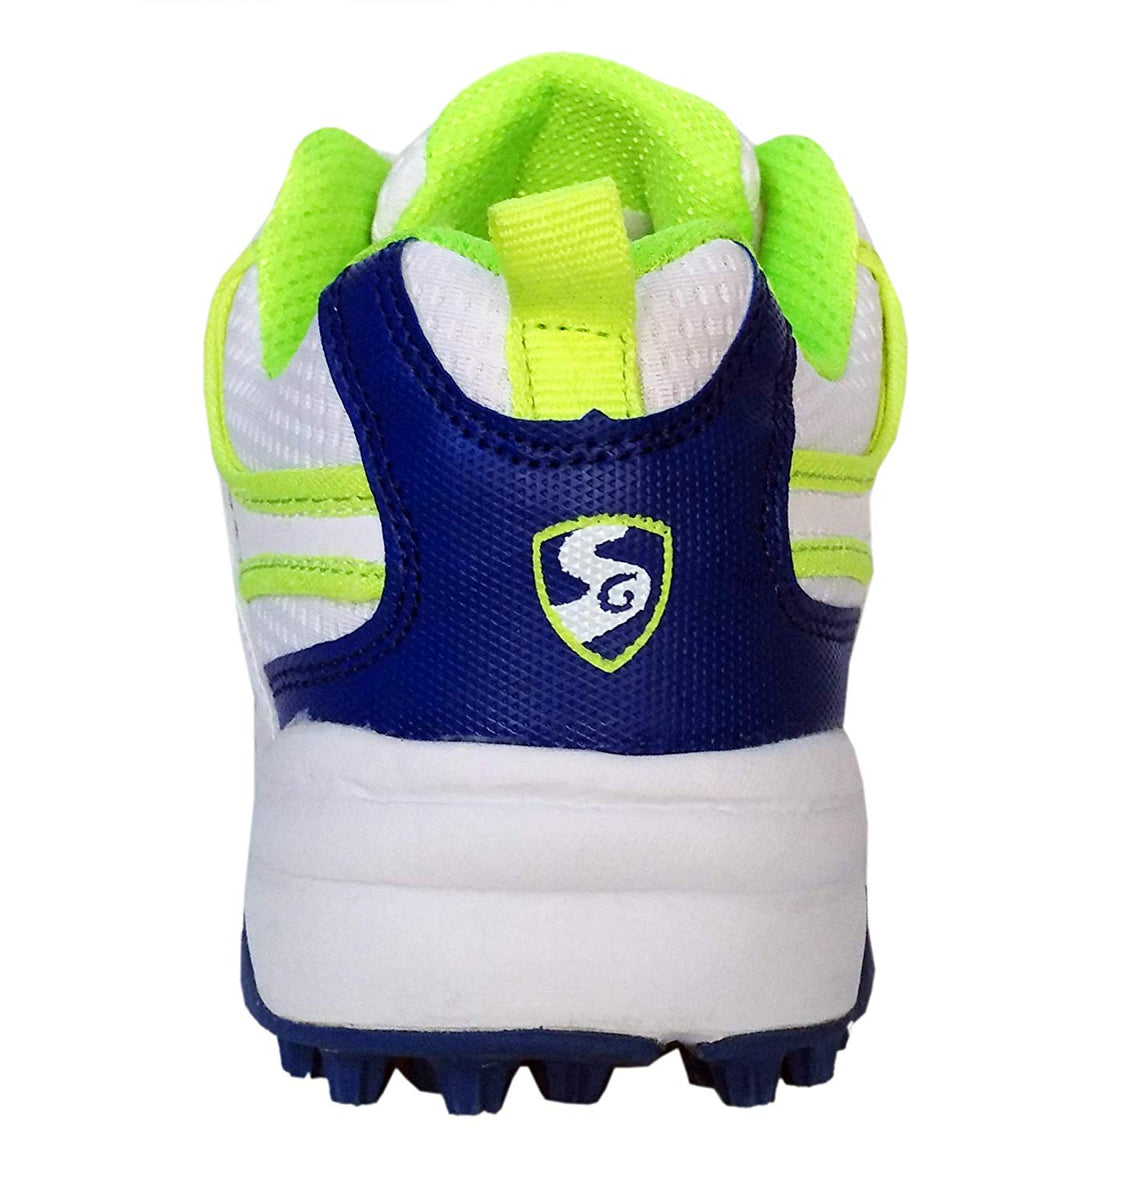 sg rubber spikes cricket shoes